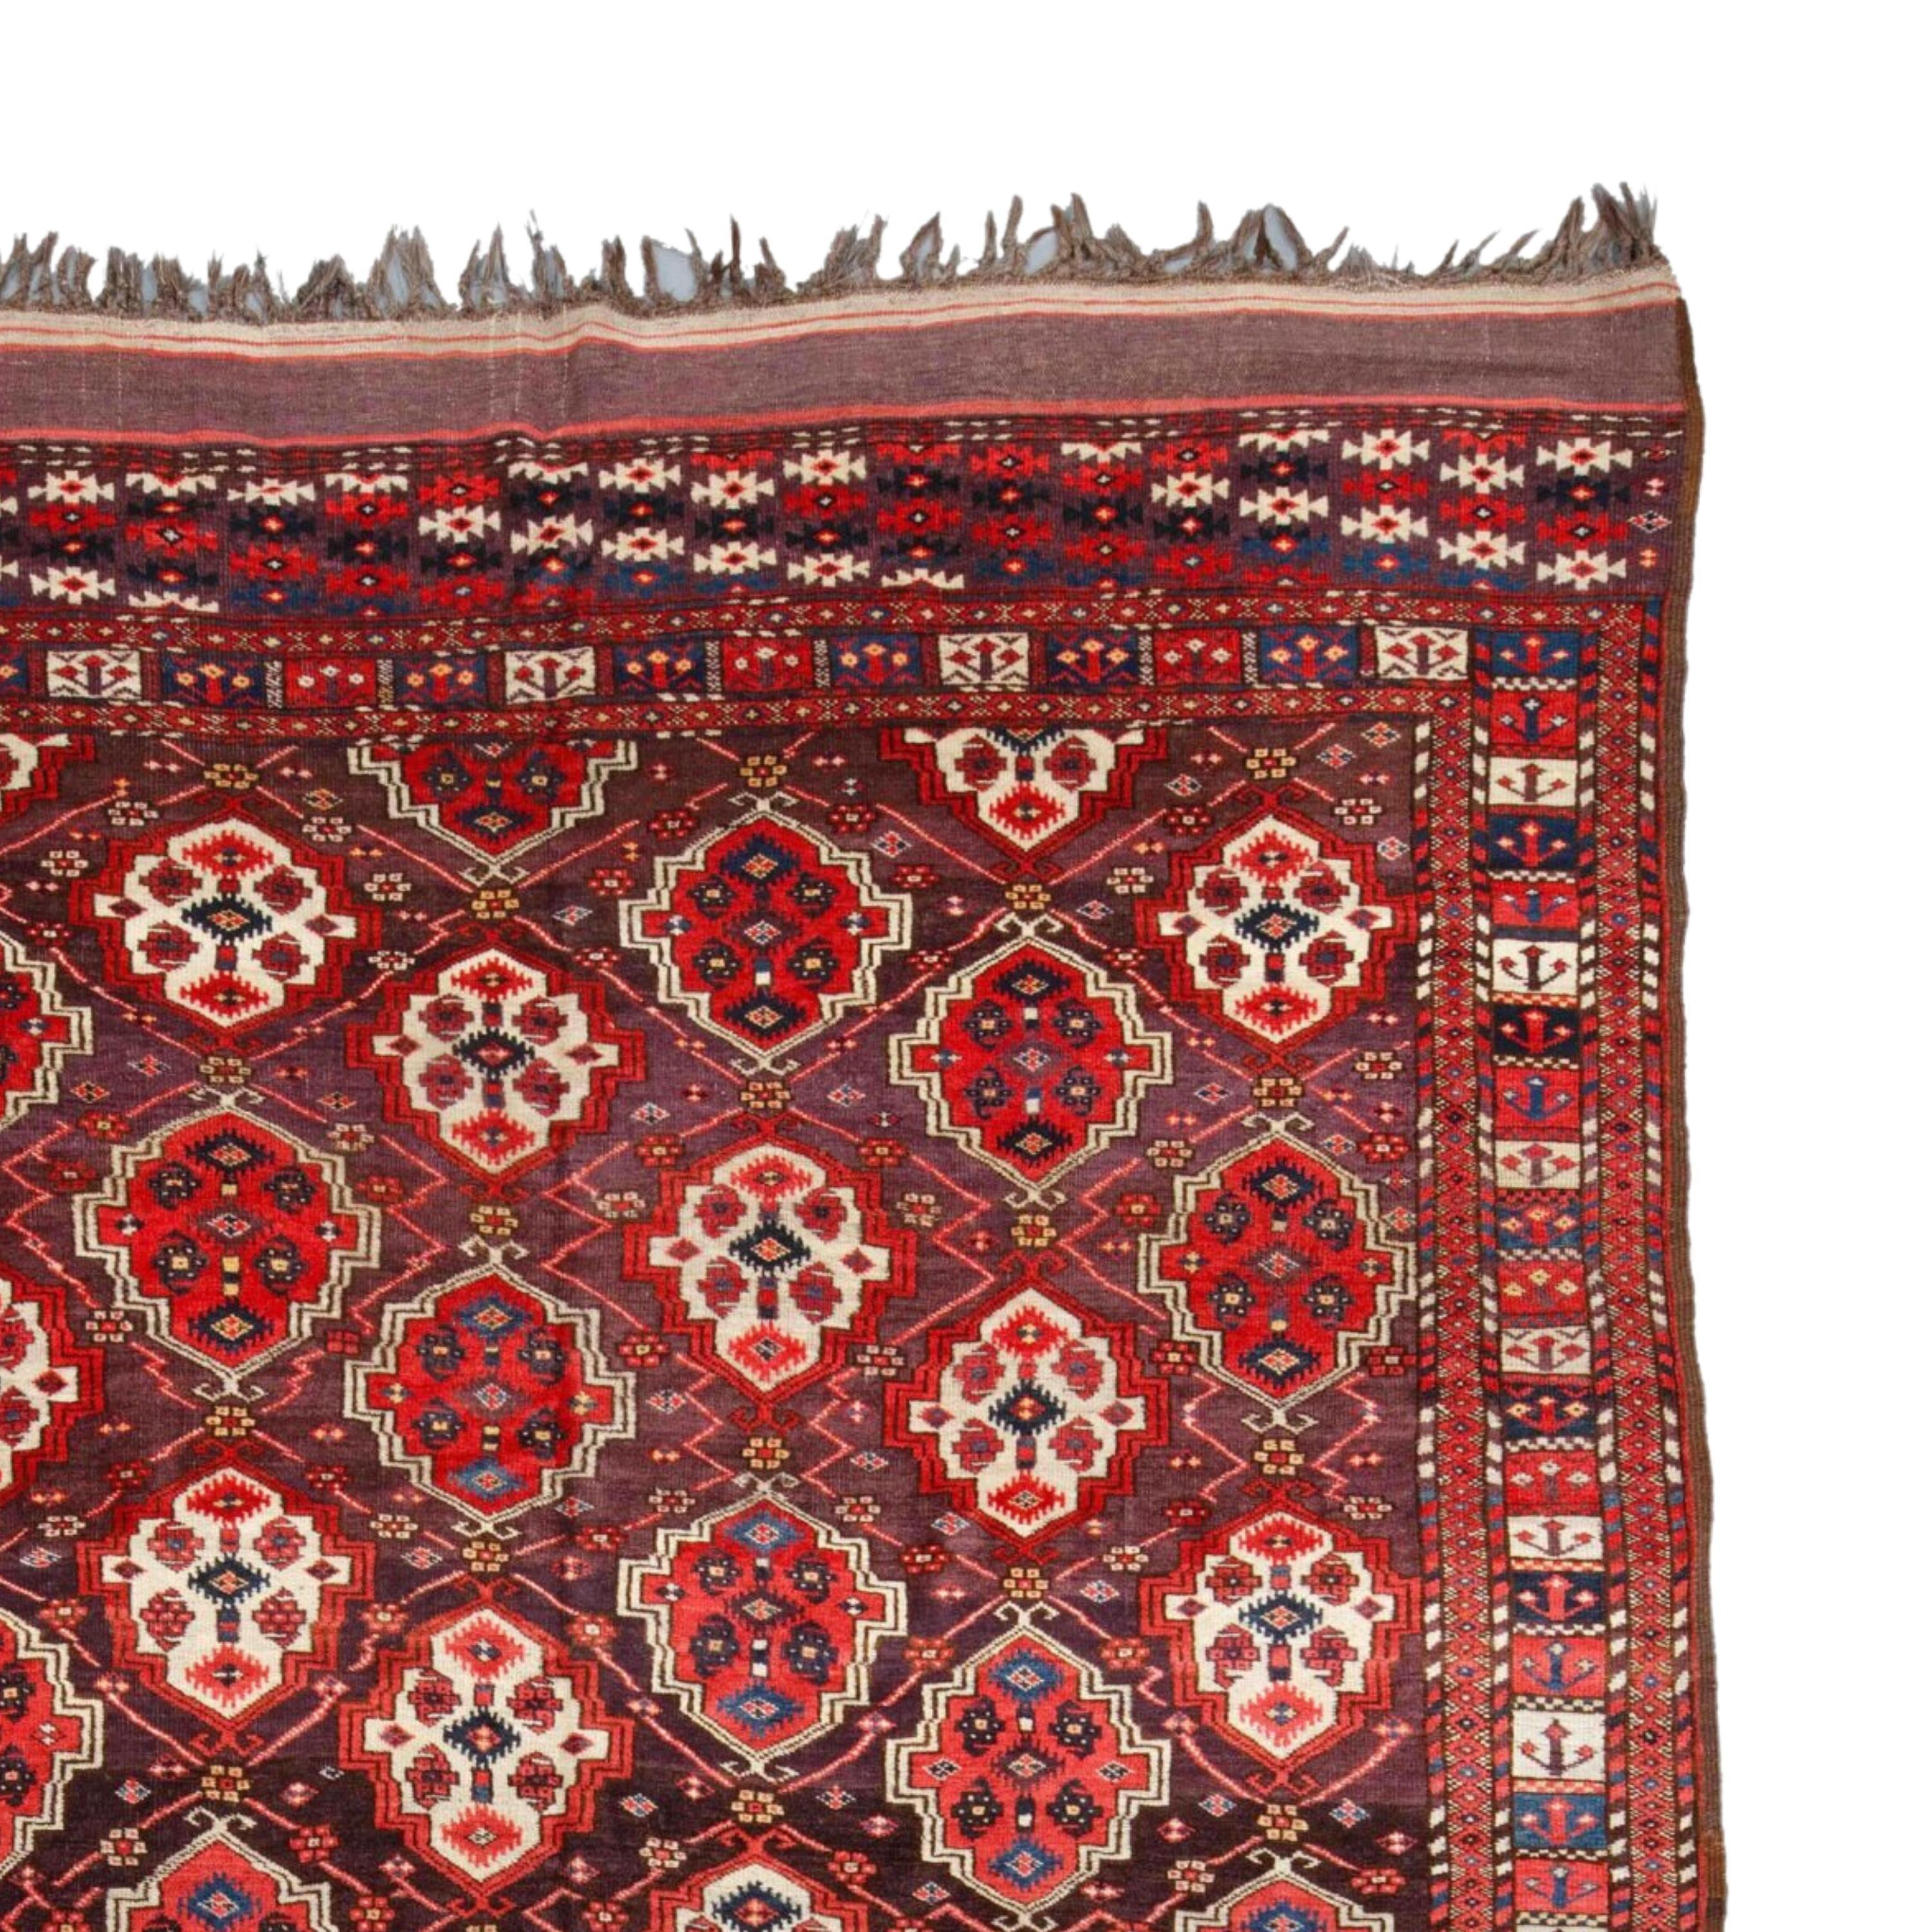 Wool Antique Chodor Main Rug - Middle of 19th Century Central Asia Turkmen Chodor Rug For Sale